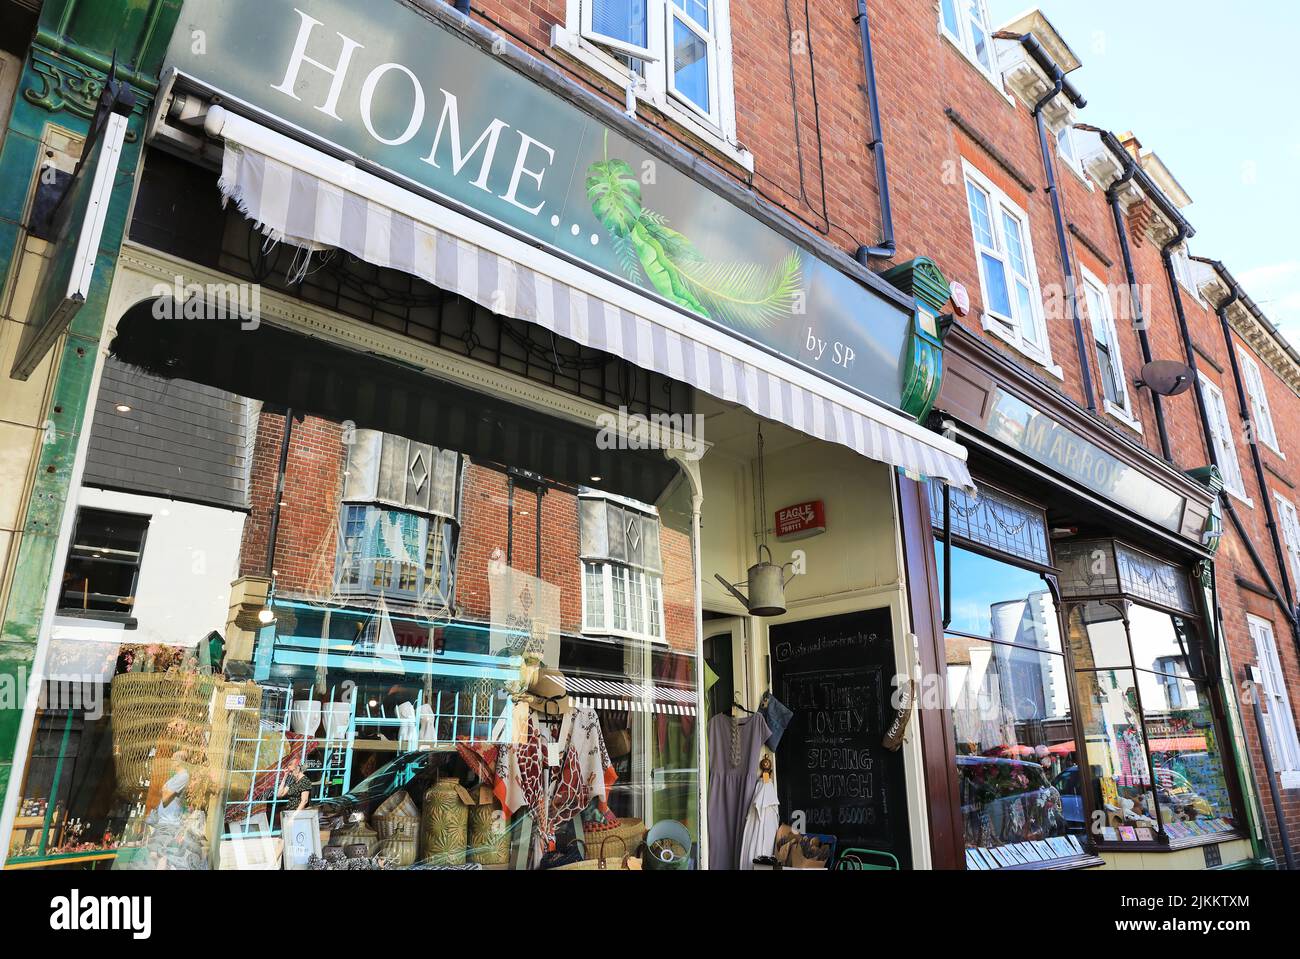 'Home by SP' interiors shop on Charlotte Street in Broadstairs town centre, in Kent, UK Stock Photo